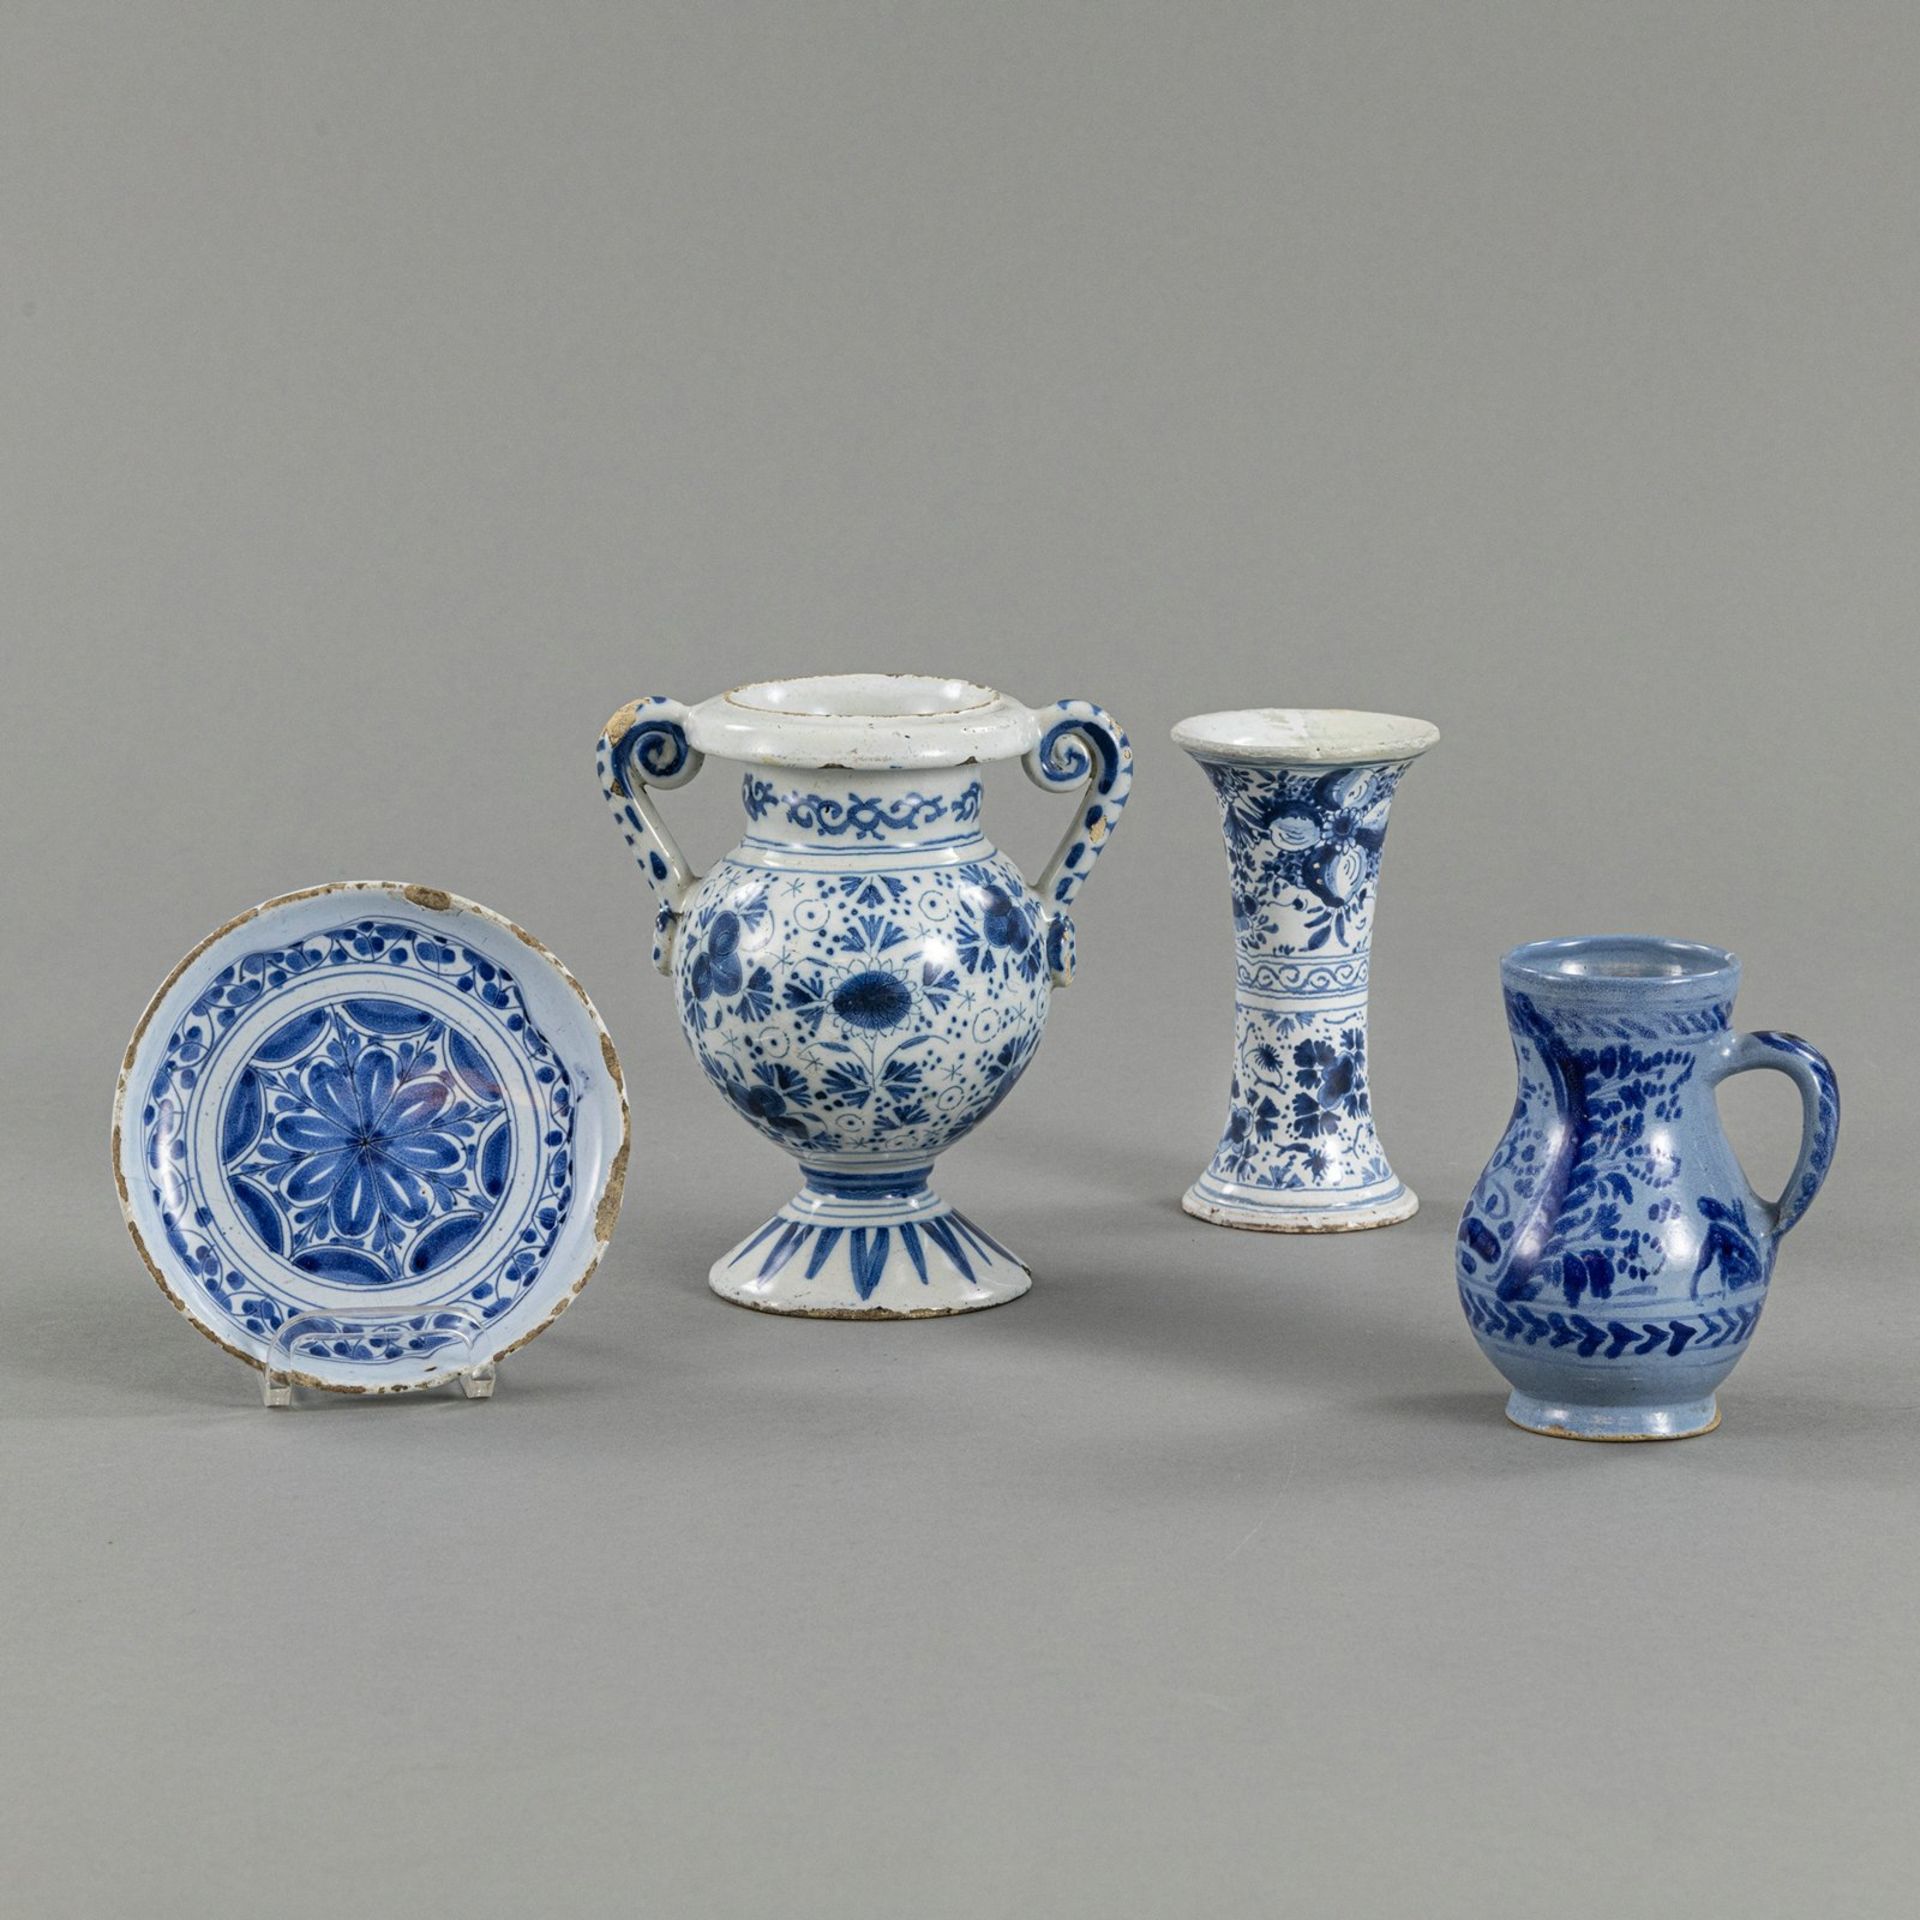 TWO VASES, A SMALL PLATE AND A SMALL JAR